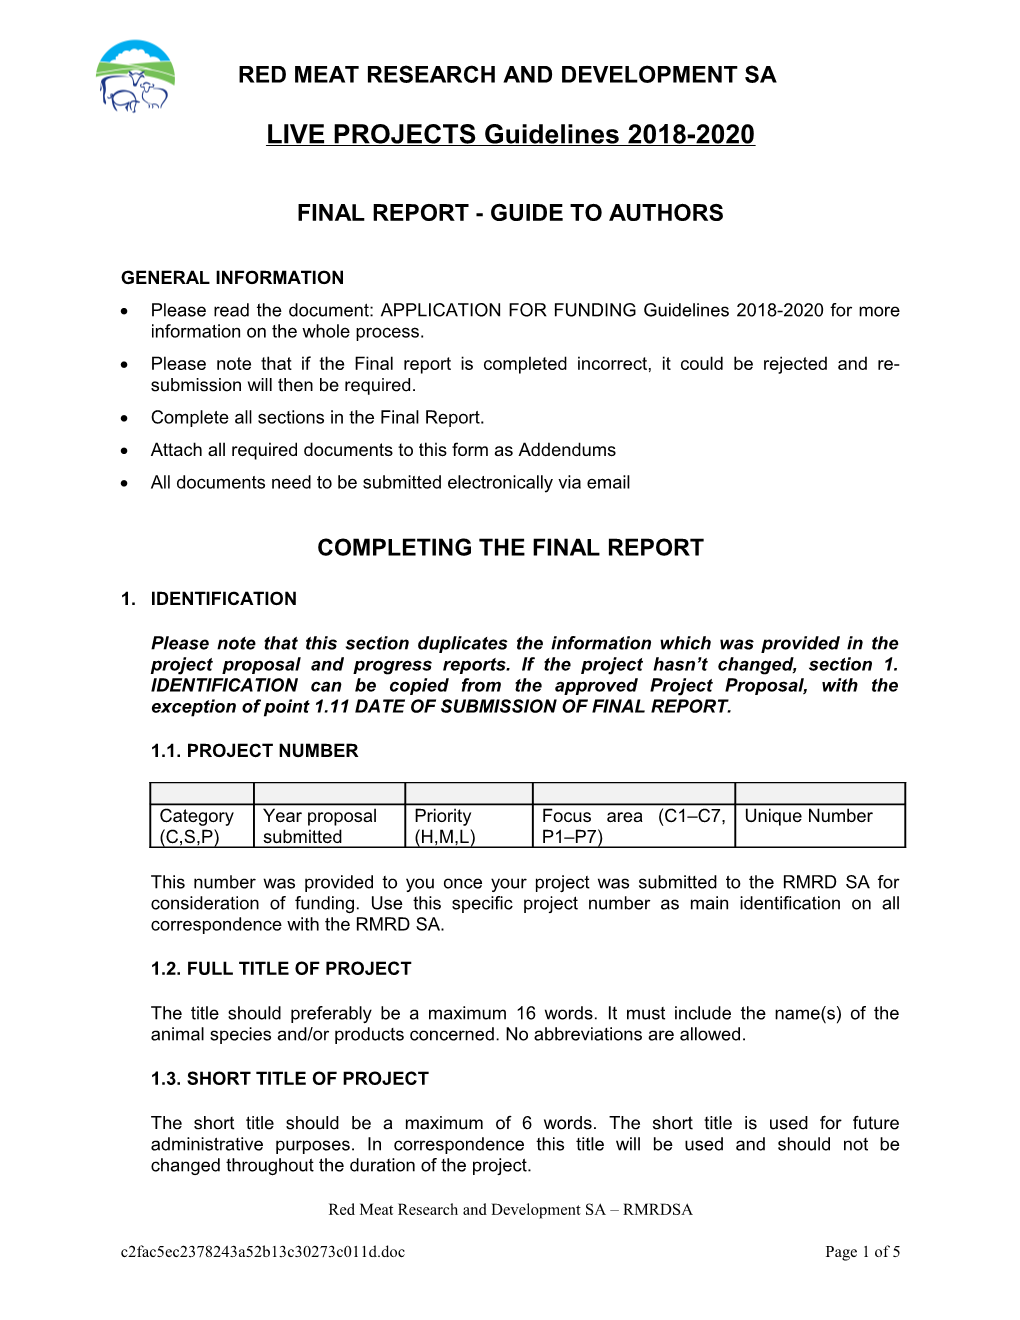 Final Report - Guide to Authors